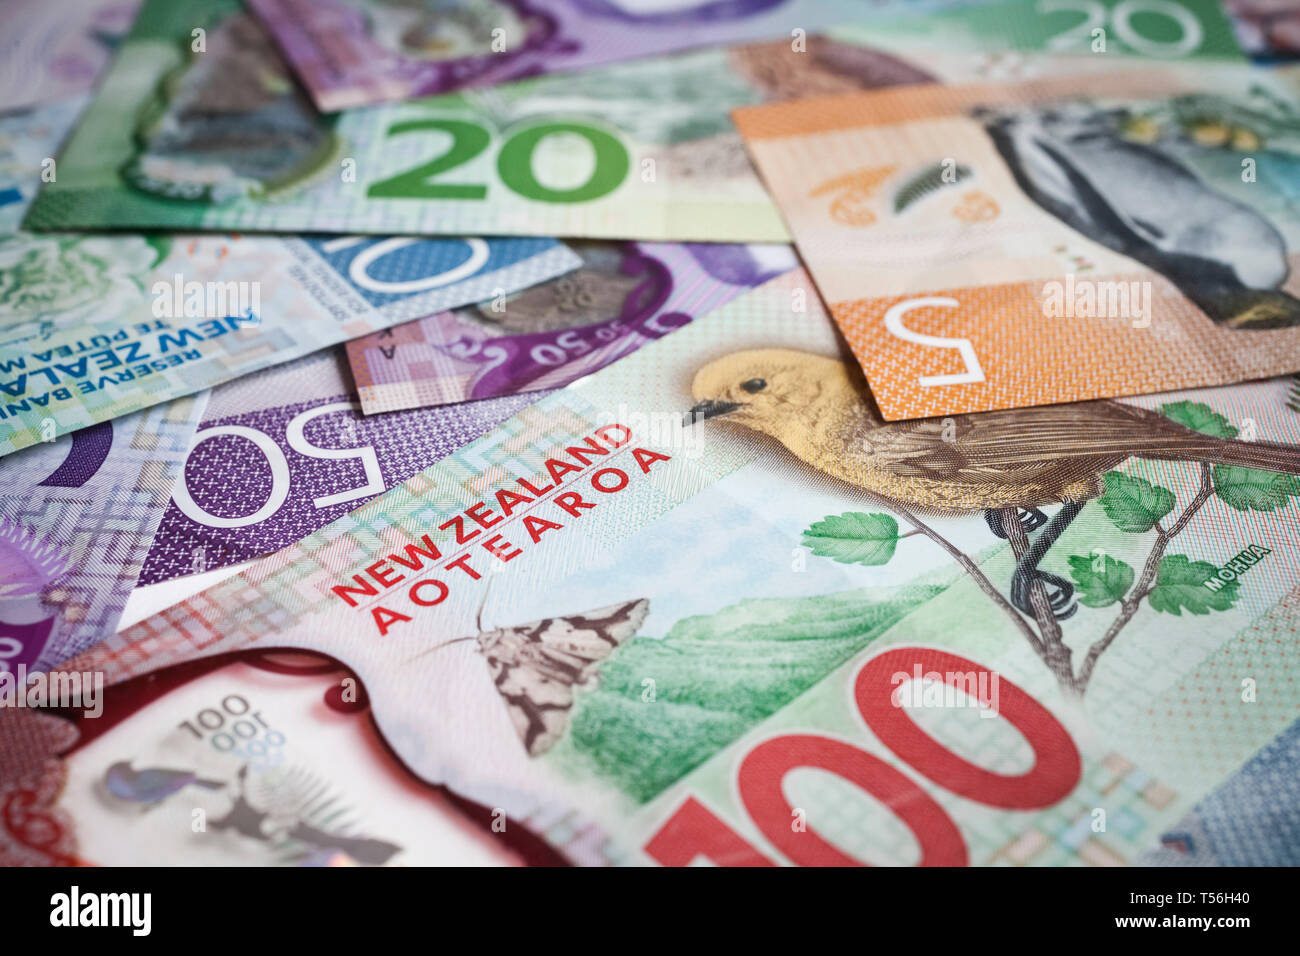 Pile of New Zealand currency laying flat on table Stock Photo